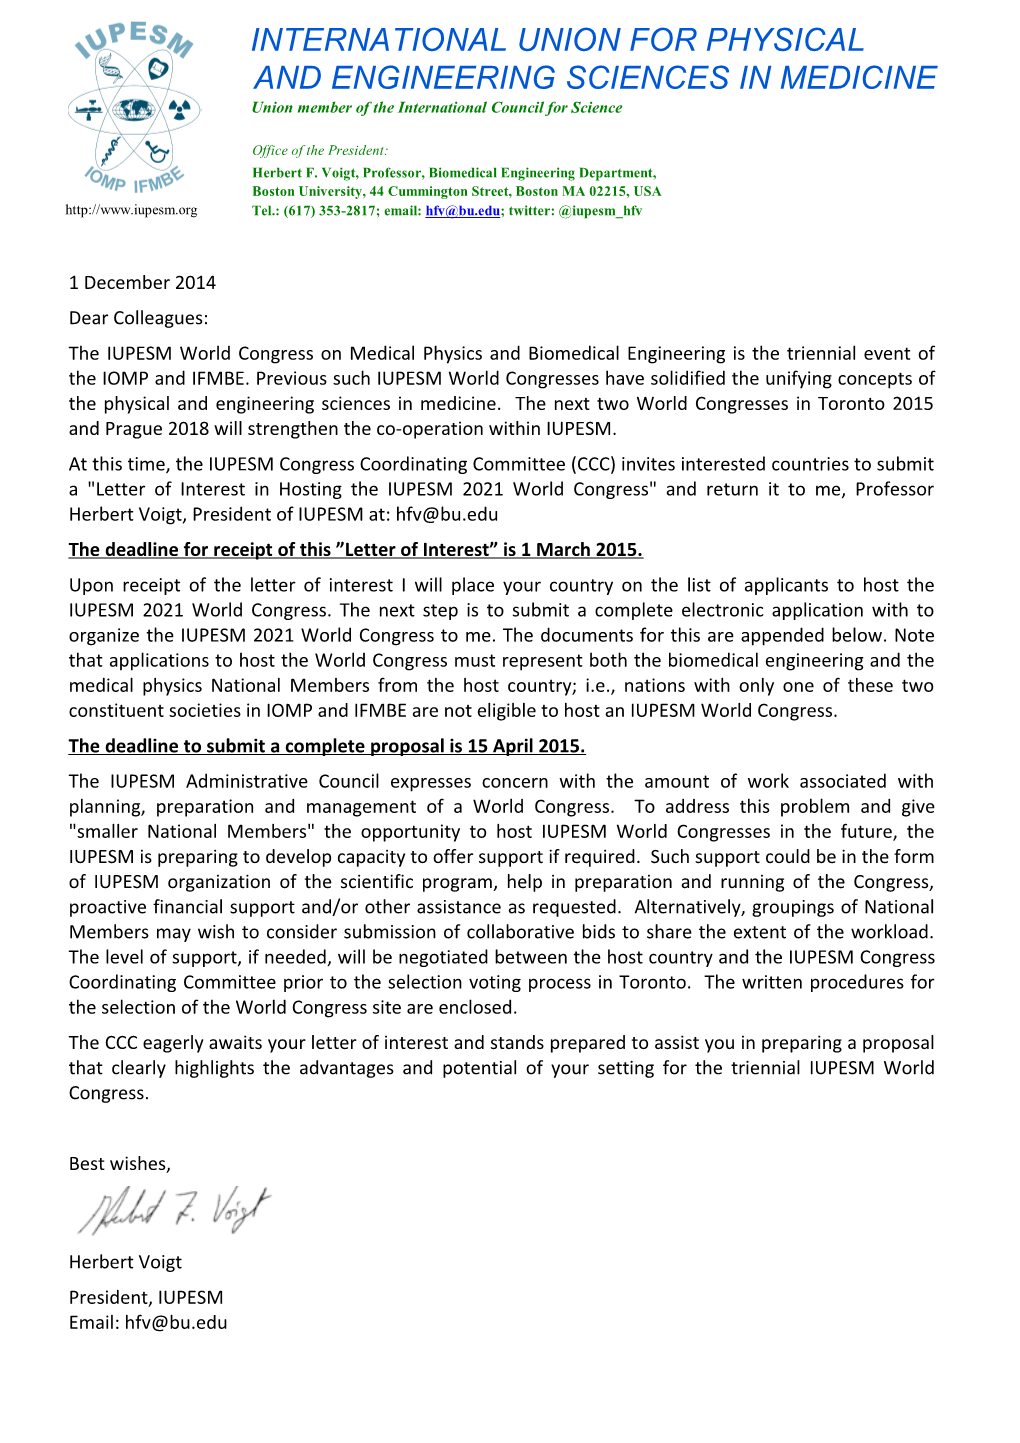 The Deadline for Receipt of This Letter of Interest Is 1 March 2015